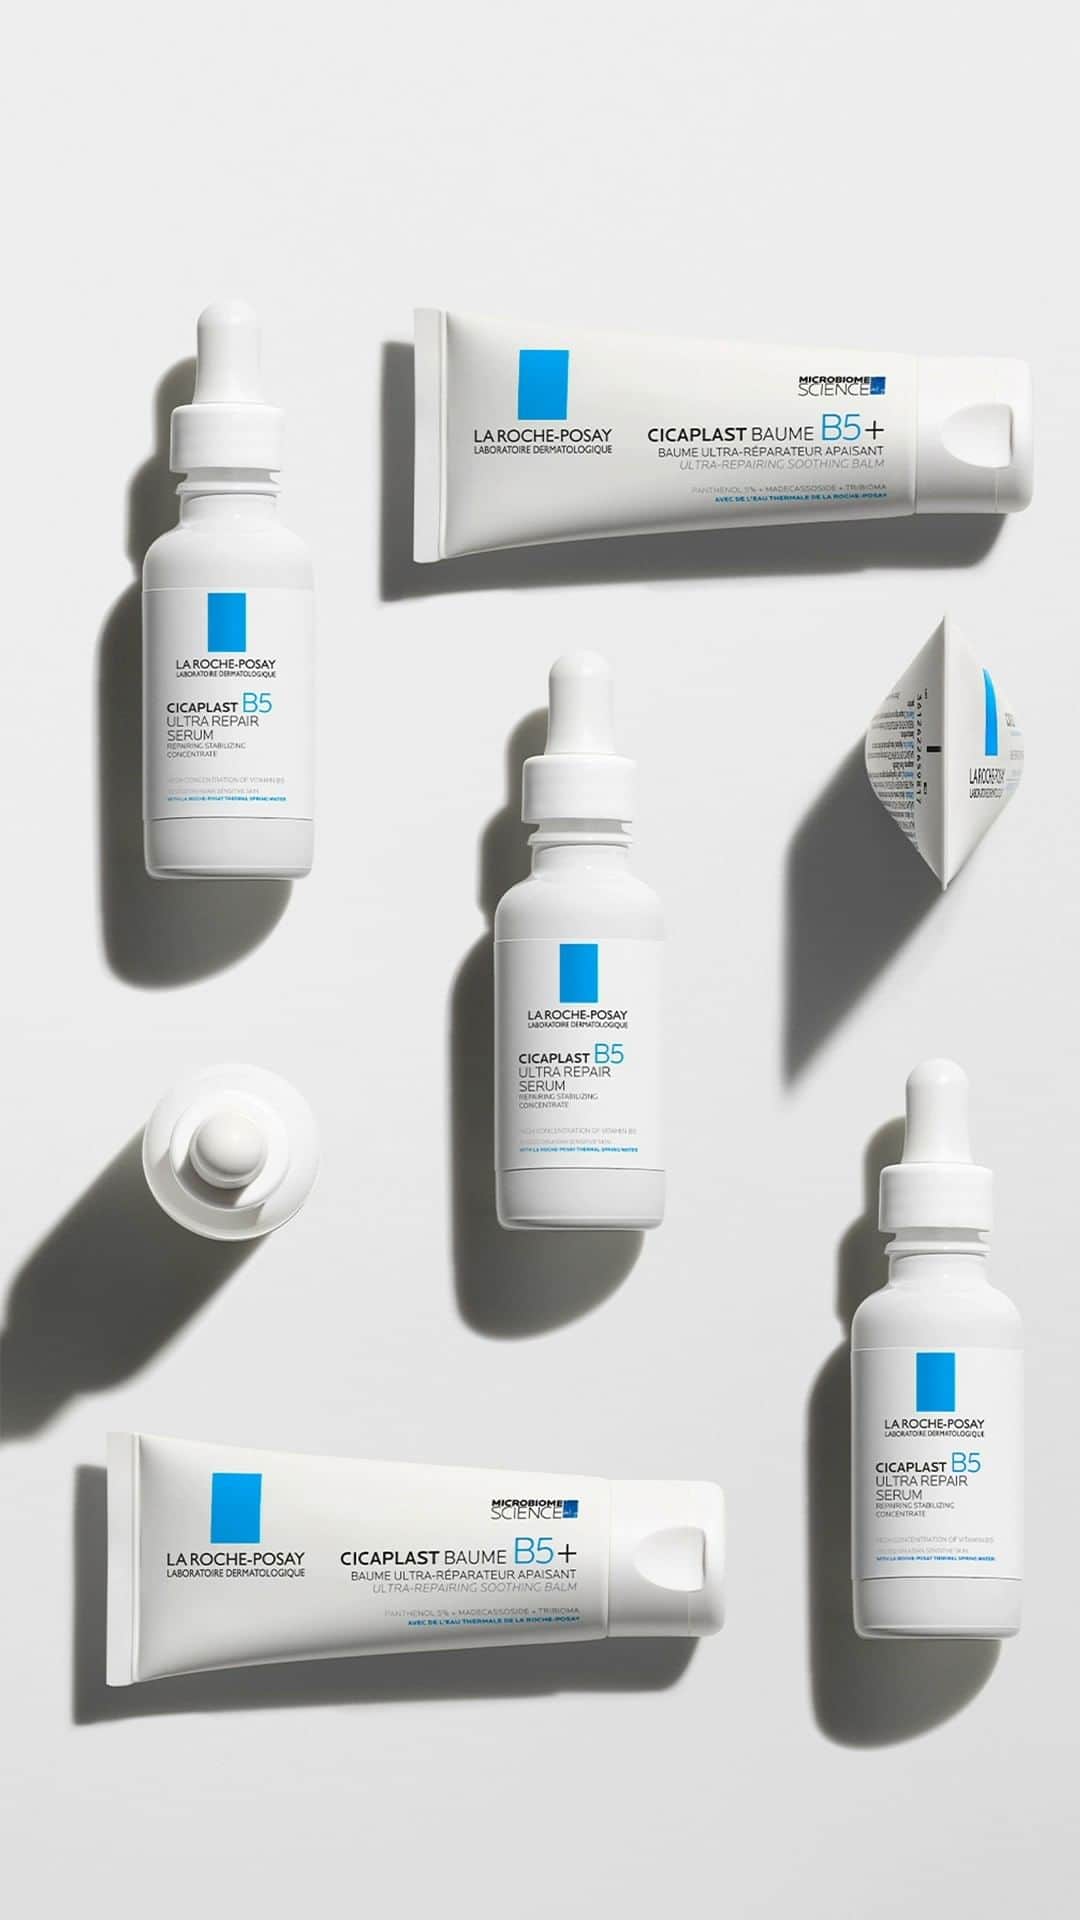 La Roche-Posayのインスタグラム：「All skin deserves a Cicaplast. Each product is specifically formulated to soothe and repair everyday skin irritations. Here's a quick introduction to the 2 heroes of our skin repair A-team:   🧬 The serum soothes the skin barrier 💫 The balm tackles up to 15 indications   Which one is your skin's favorite? Not too sure? It’s time to discover our entire range on our website.   All languages spoken here! Feel free to talk to us at anytime. #larocheposay #cicaplast #sensitiveskin #skinrepair Global official page from La Roche-Posay, France.」